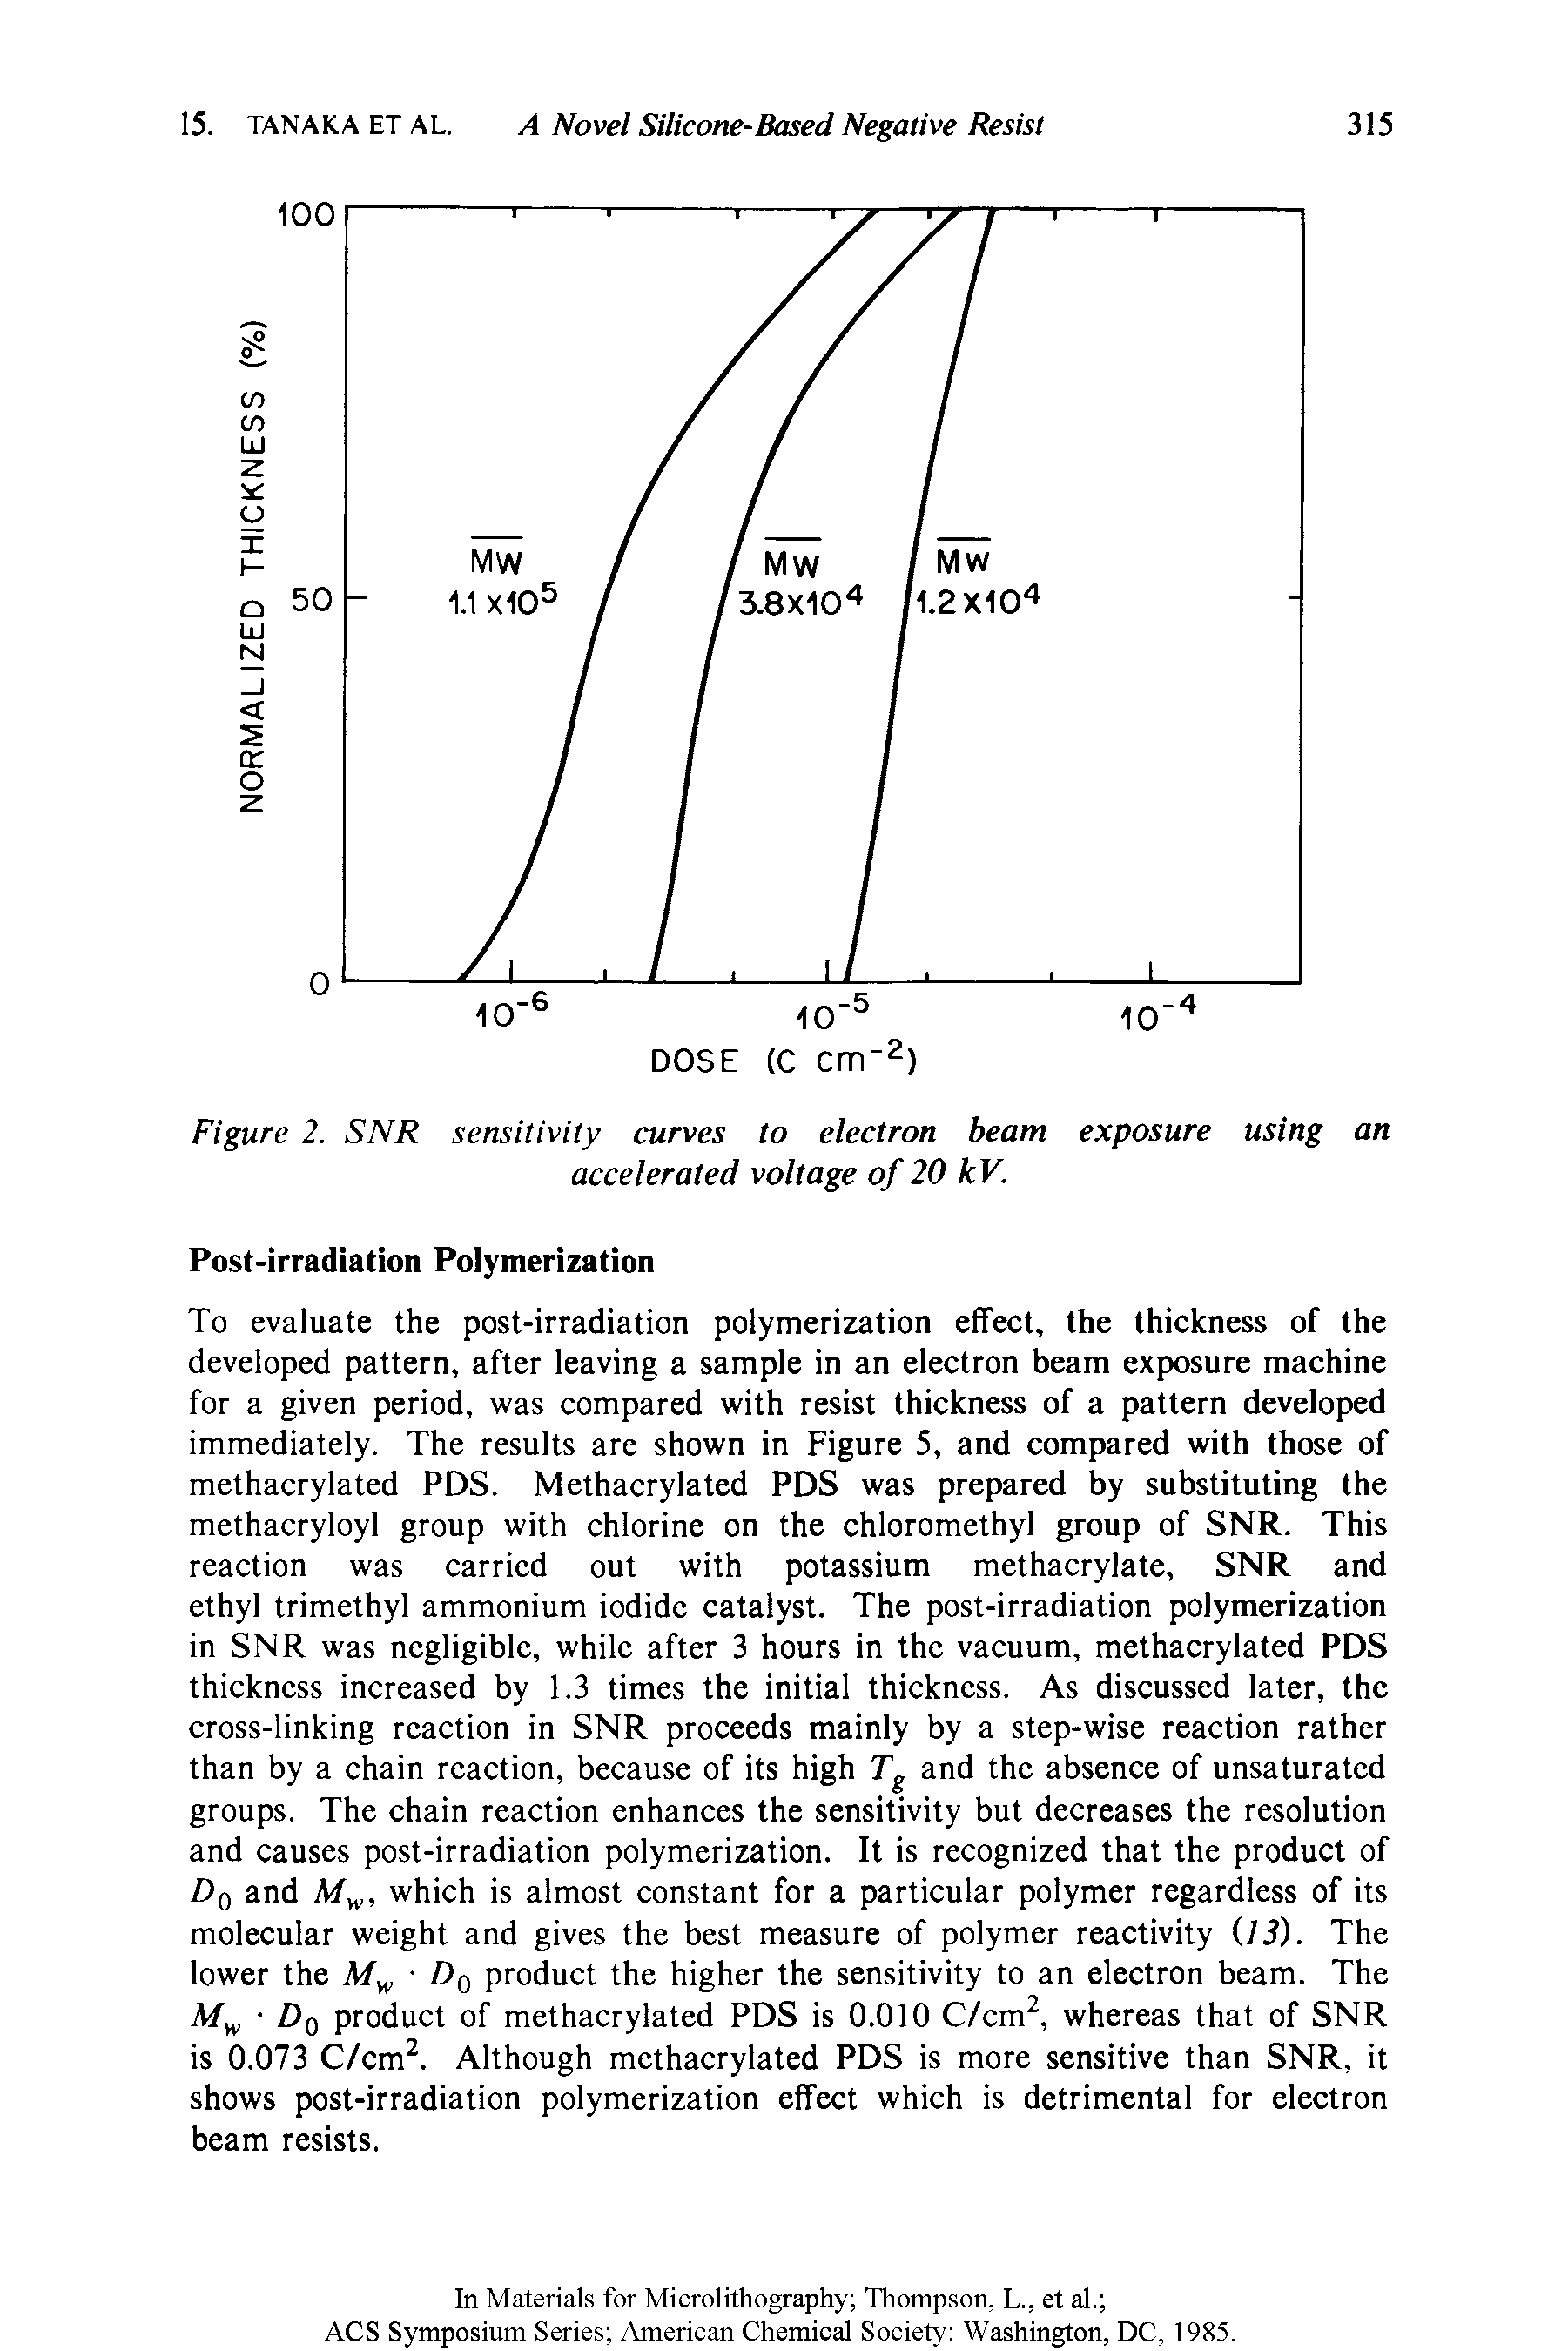 Figure 2. SNR sensitivity curves to electron beam exposure using an accelerated voltage of 20 kV.